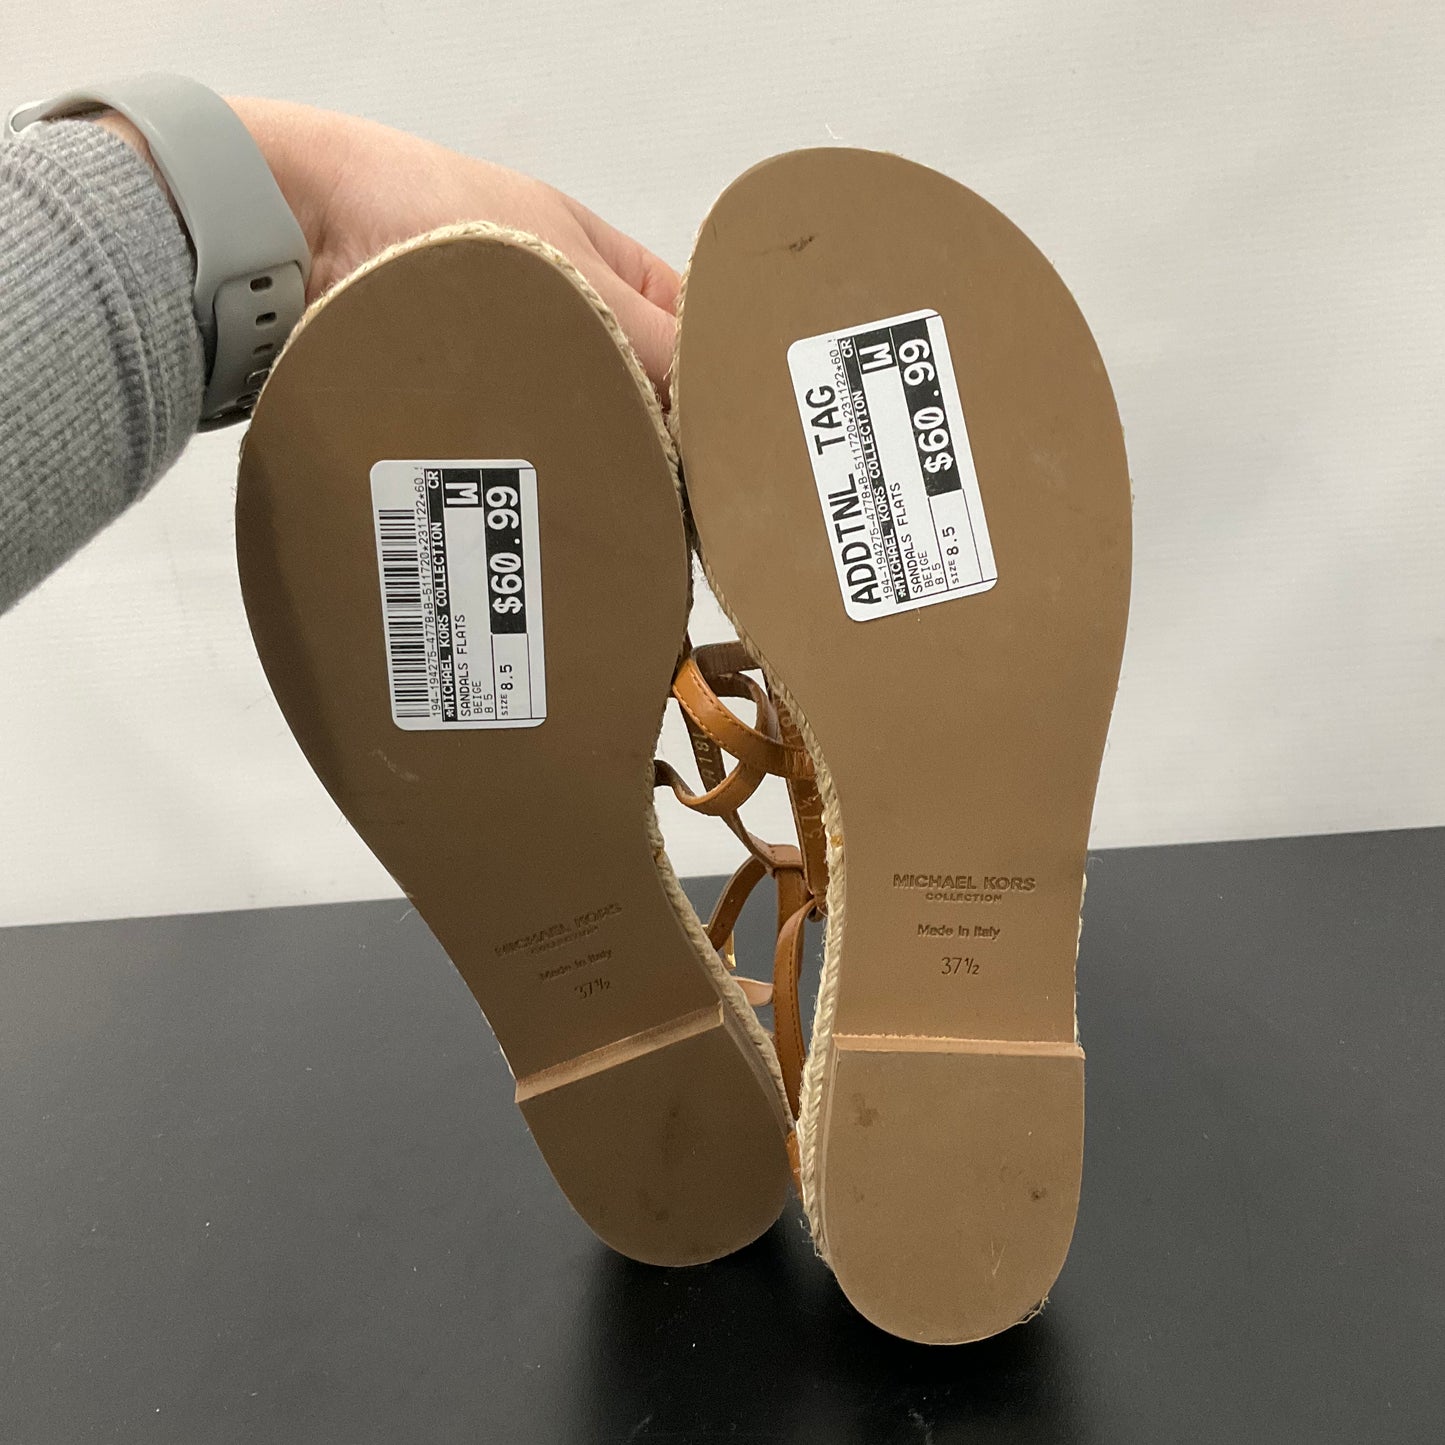 Sandals Flats By Michael Kors Collection  Size: 8.5